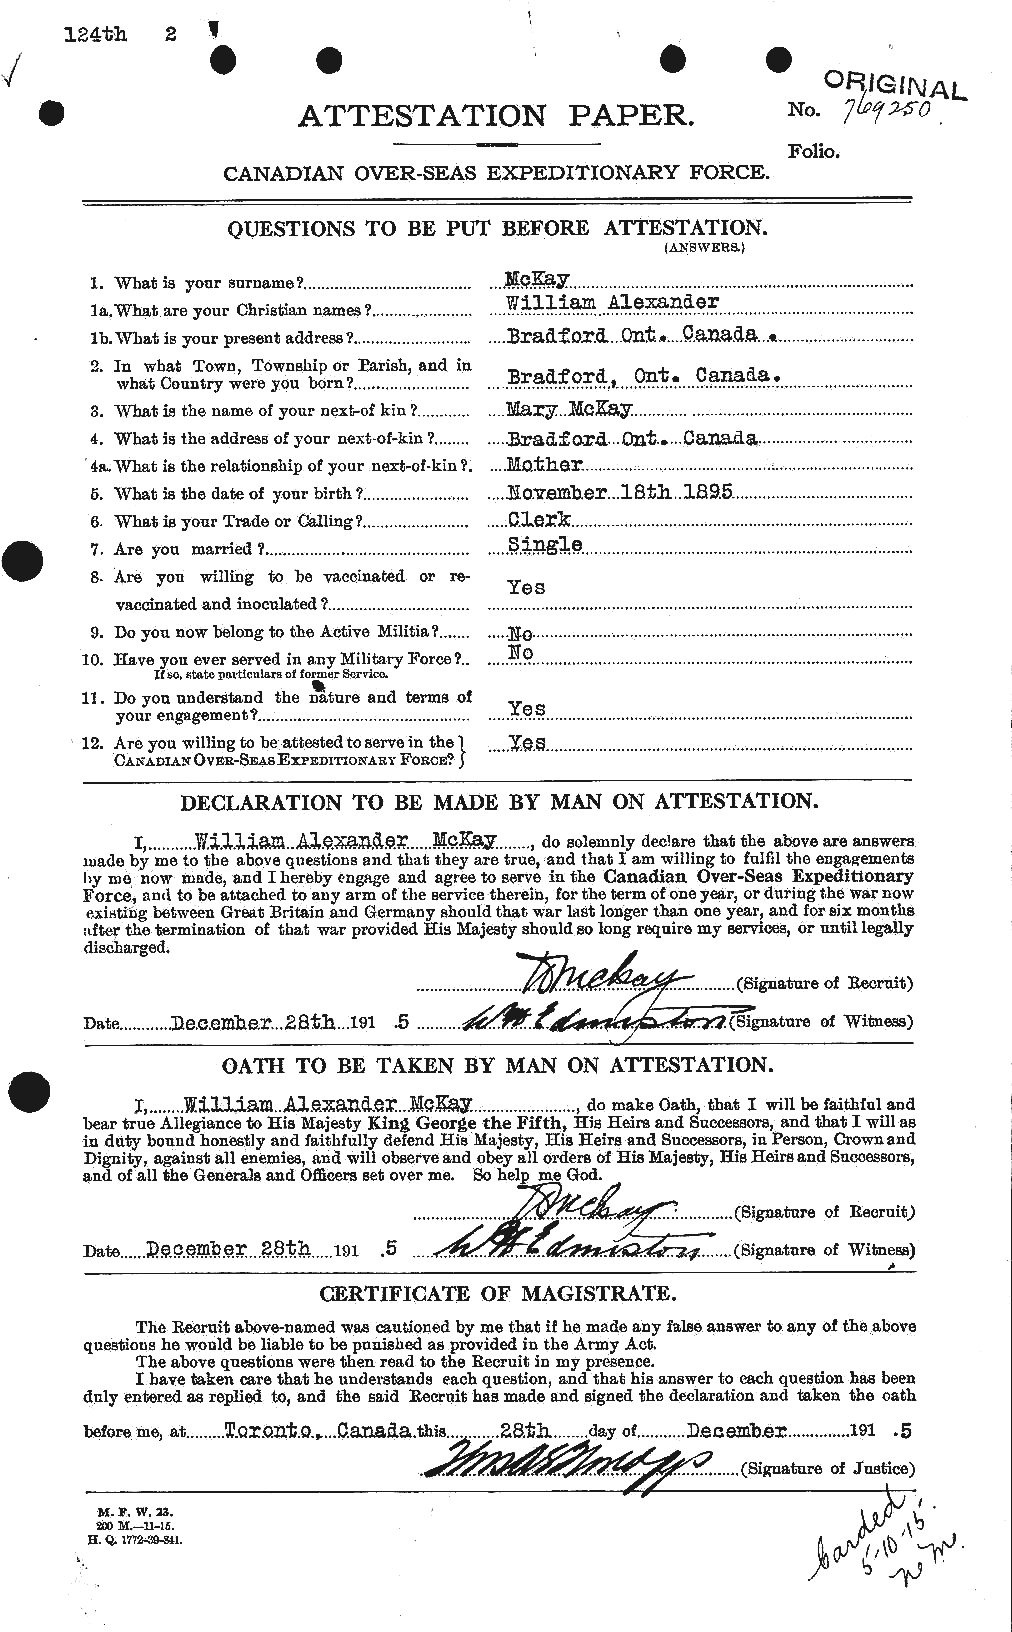 Personnel Records of the First World War - CEF 530250a